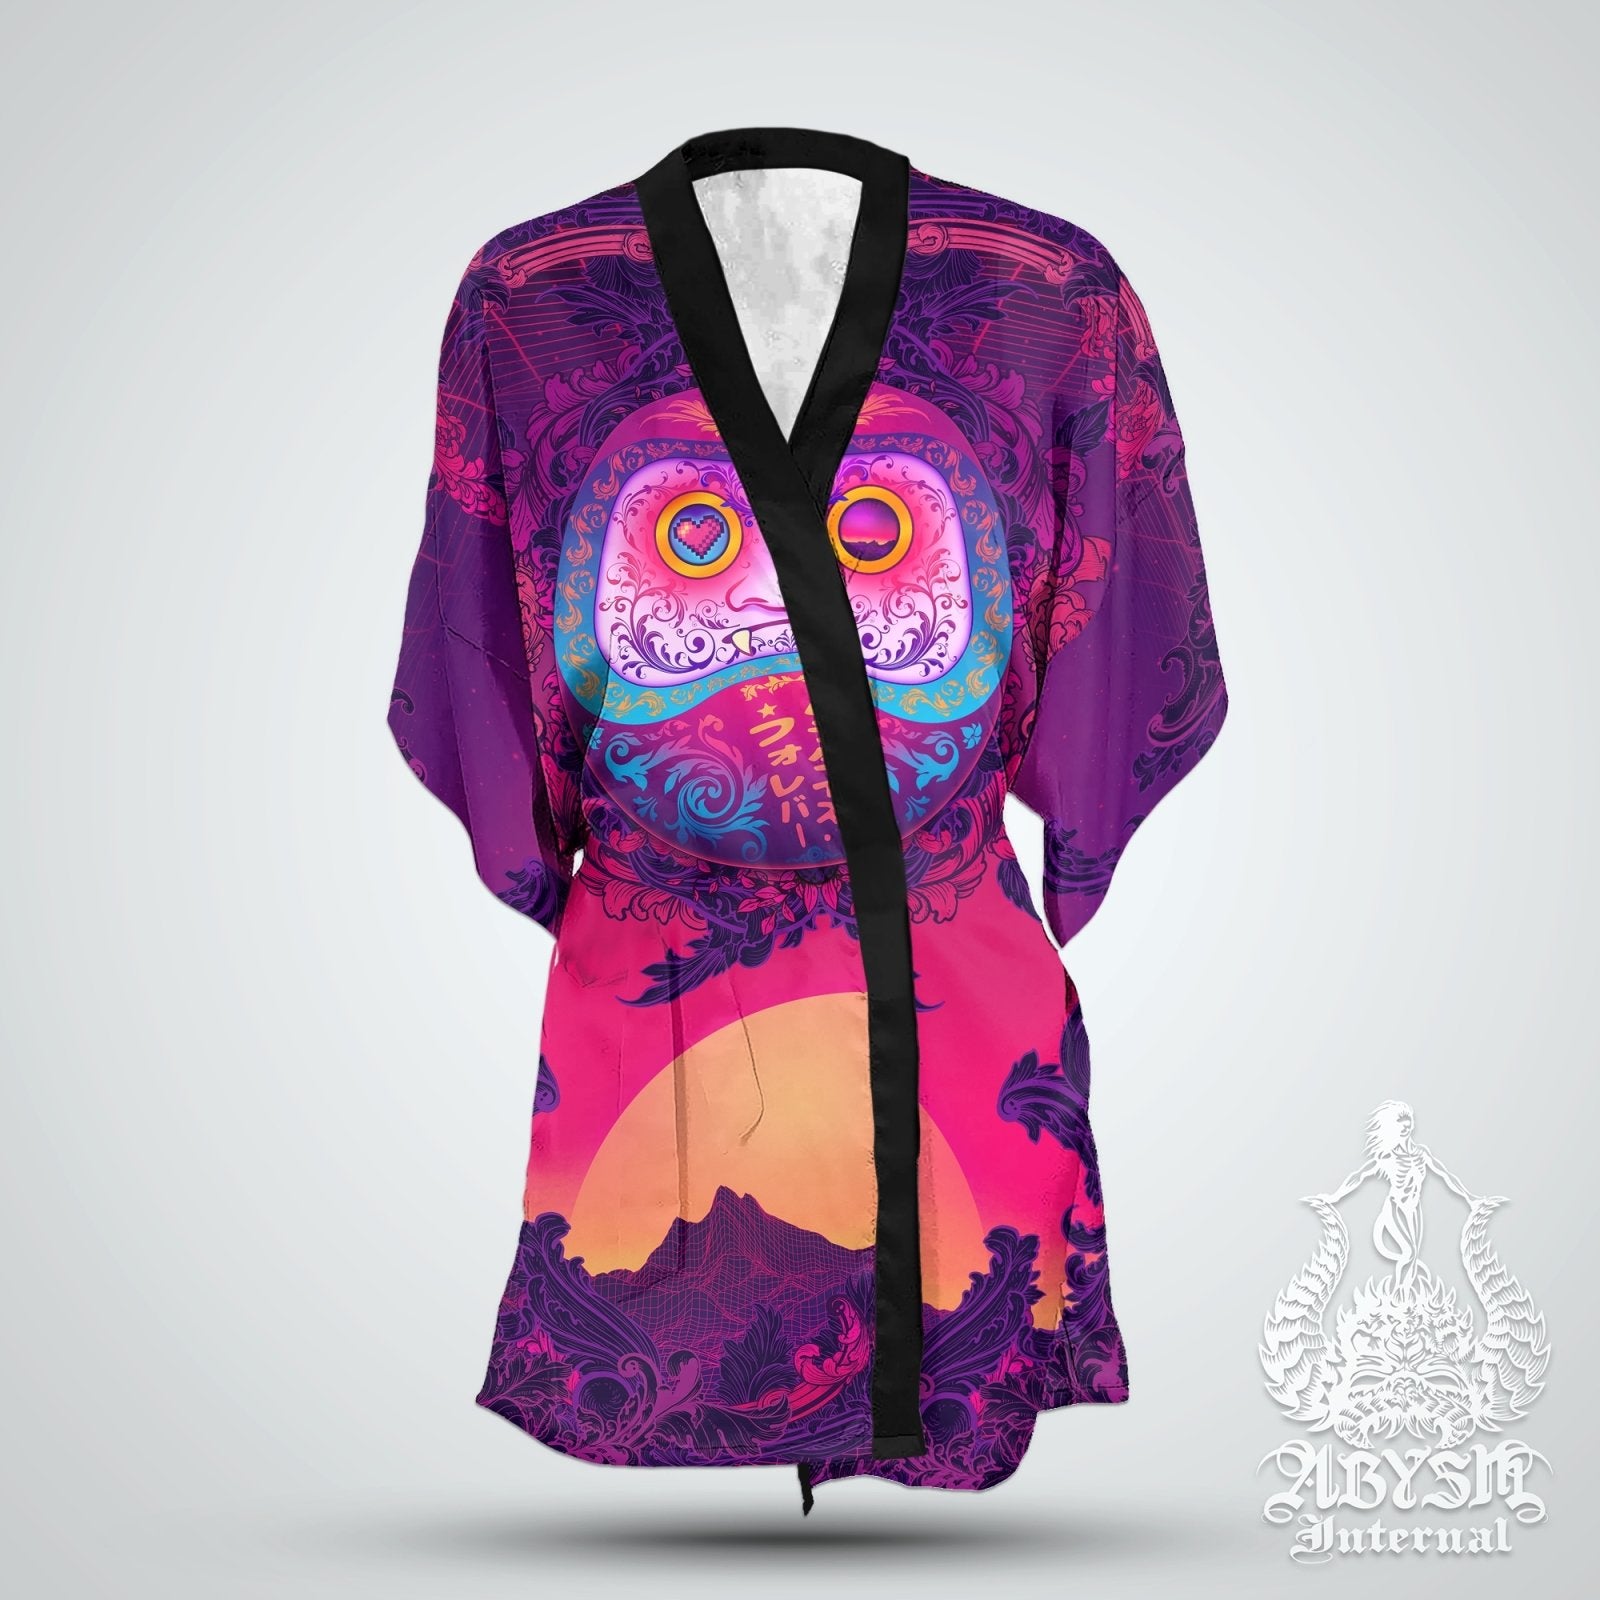 Anime Convention Cover Up, Synthwave Outfit, Retrowave Party Kimono, Vaporwave Summer Festival Robe, Japanese Art, Psychedelic 80s, Alternative Clothing, Unisex - Daruma - Abysm Internal